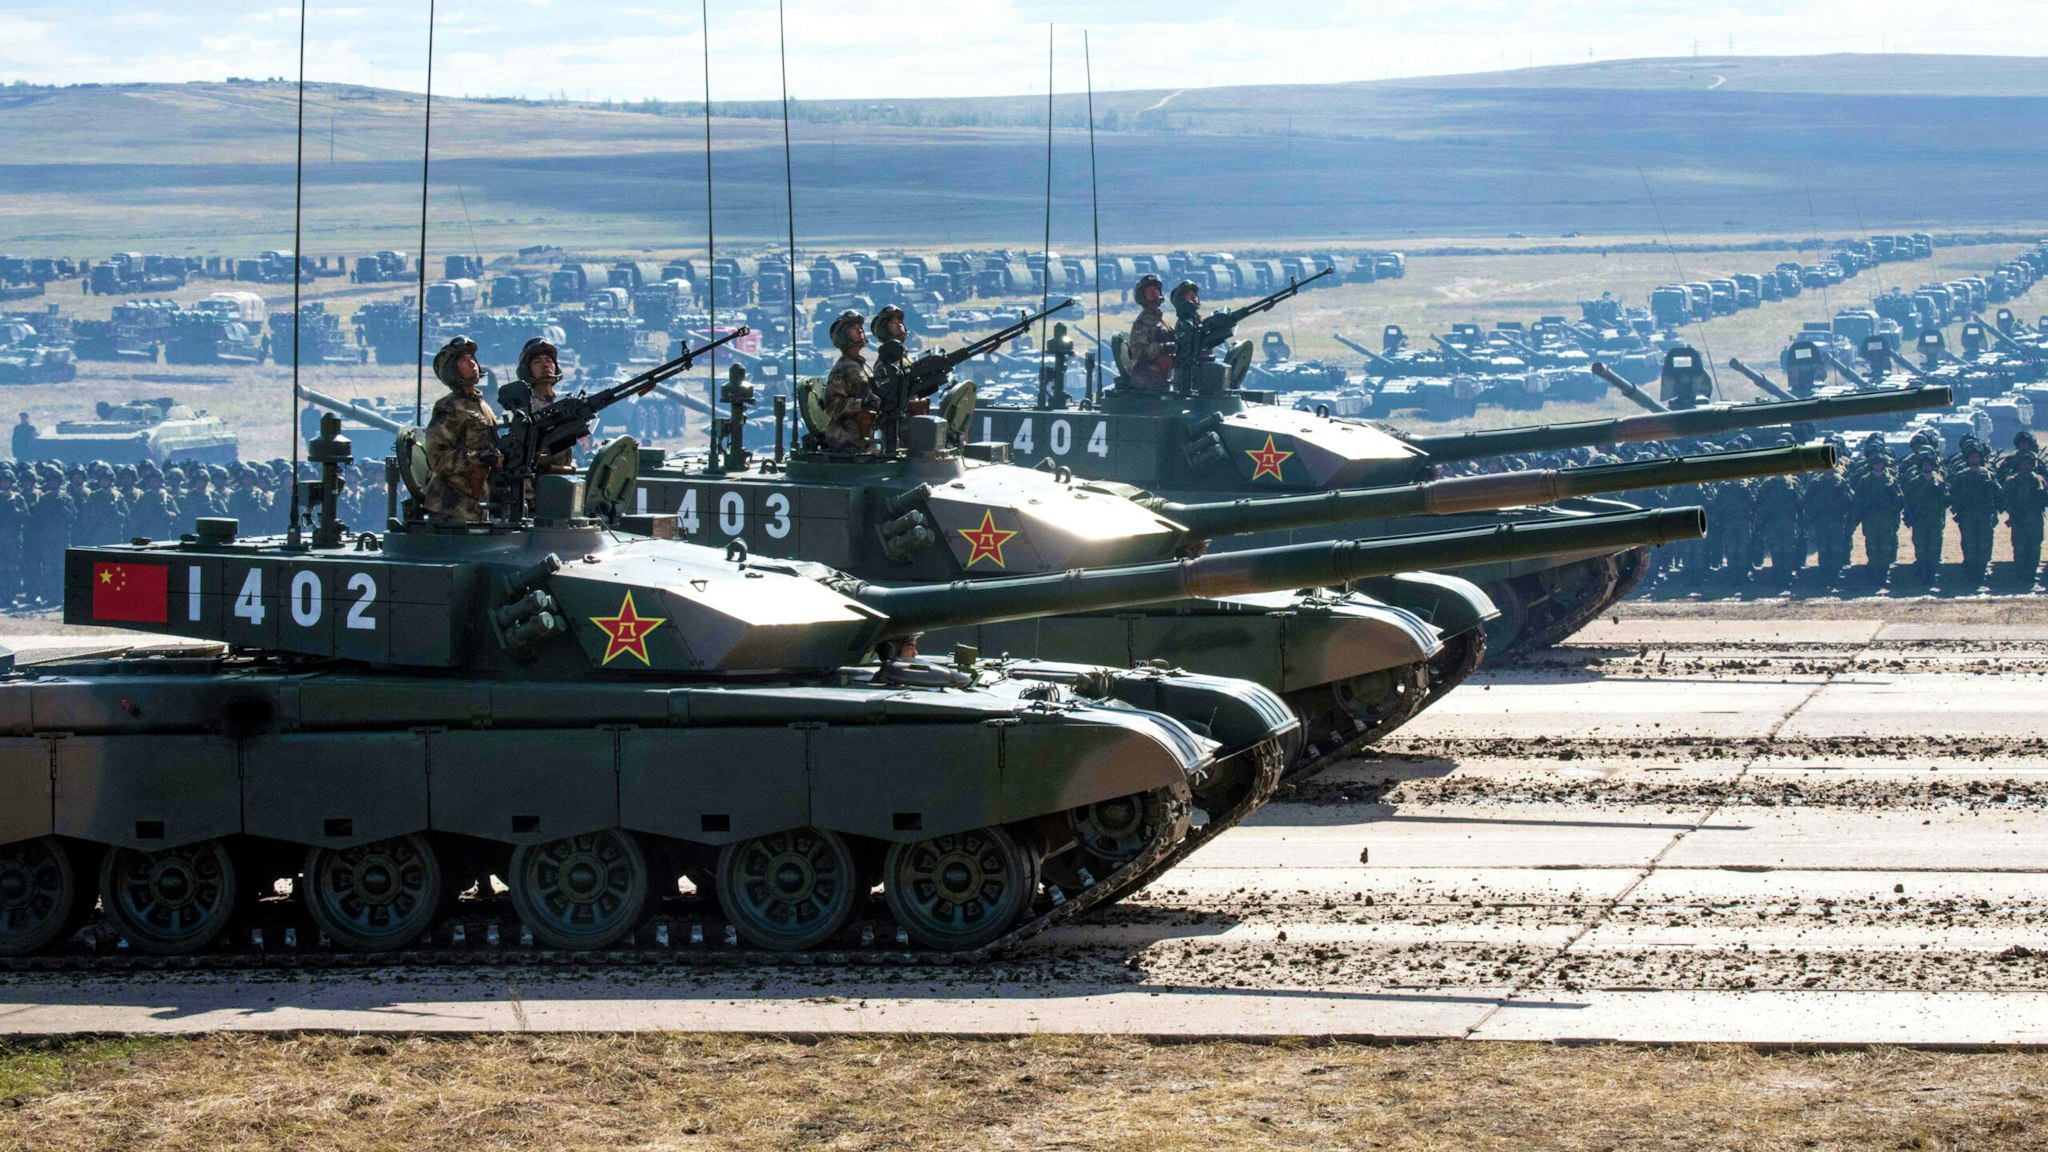 Chinese tanks parade at the end of the day of the Vostok-2018 (East-2018) military drills at Tsugol training ground not far from the borders with China and Mongolia in Siberia, on September 13, 2018.